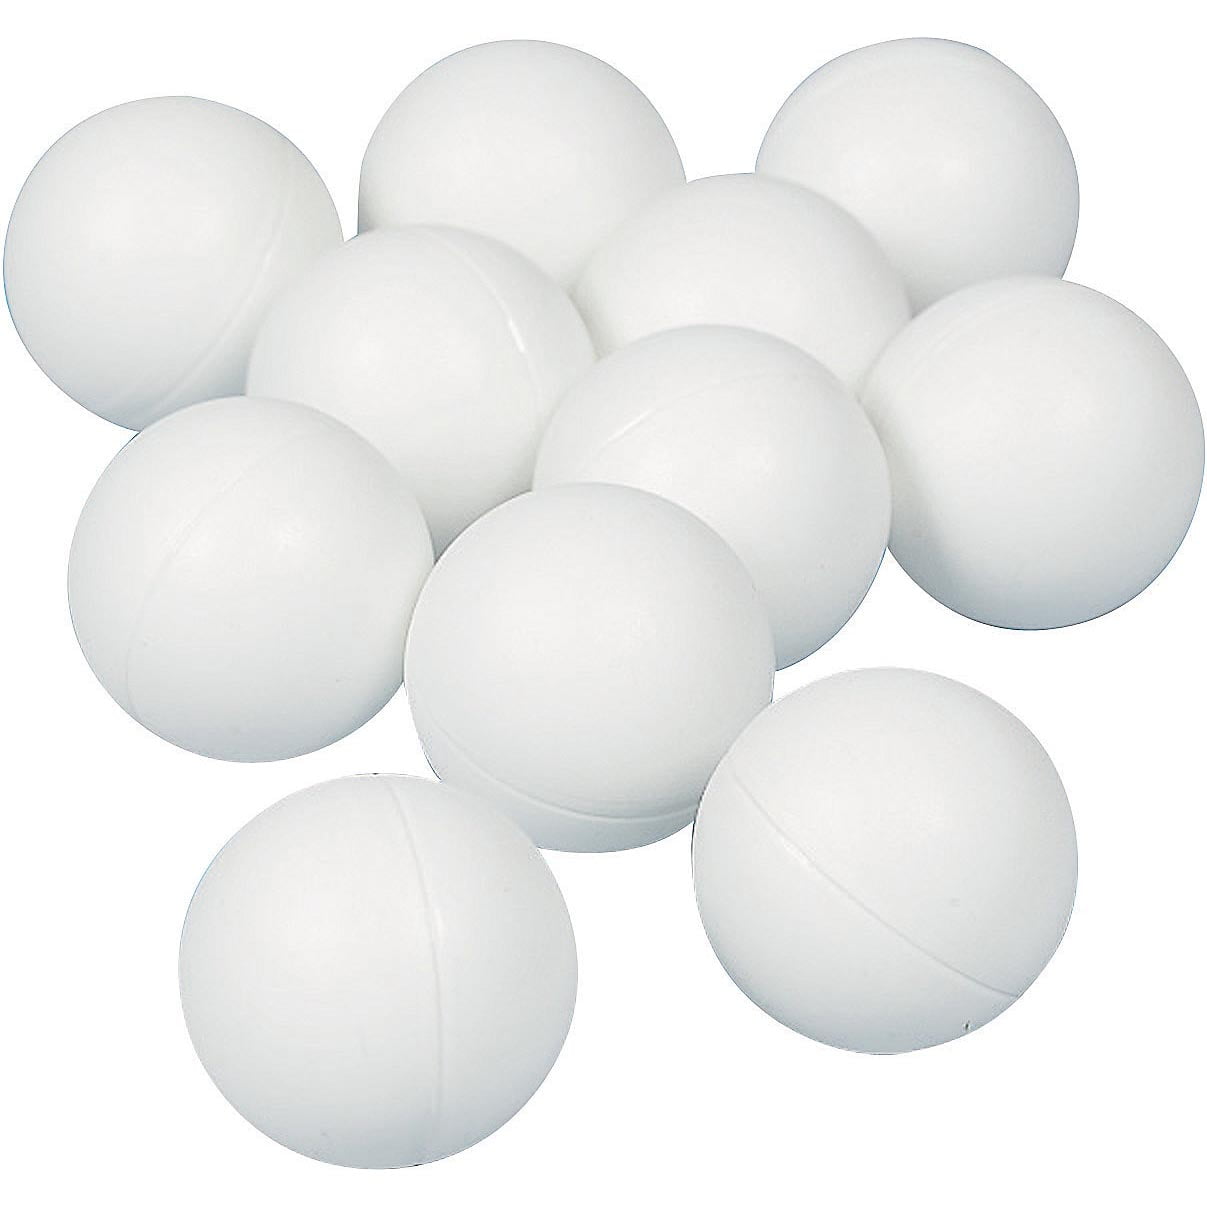 ping pong ball online